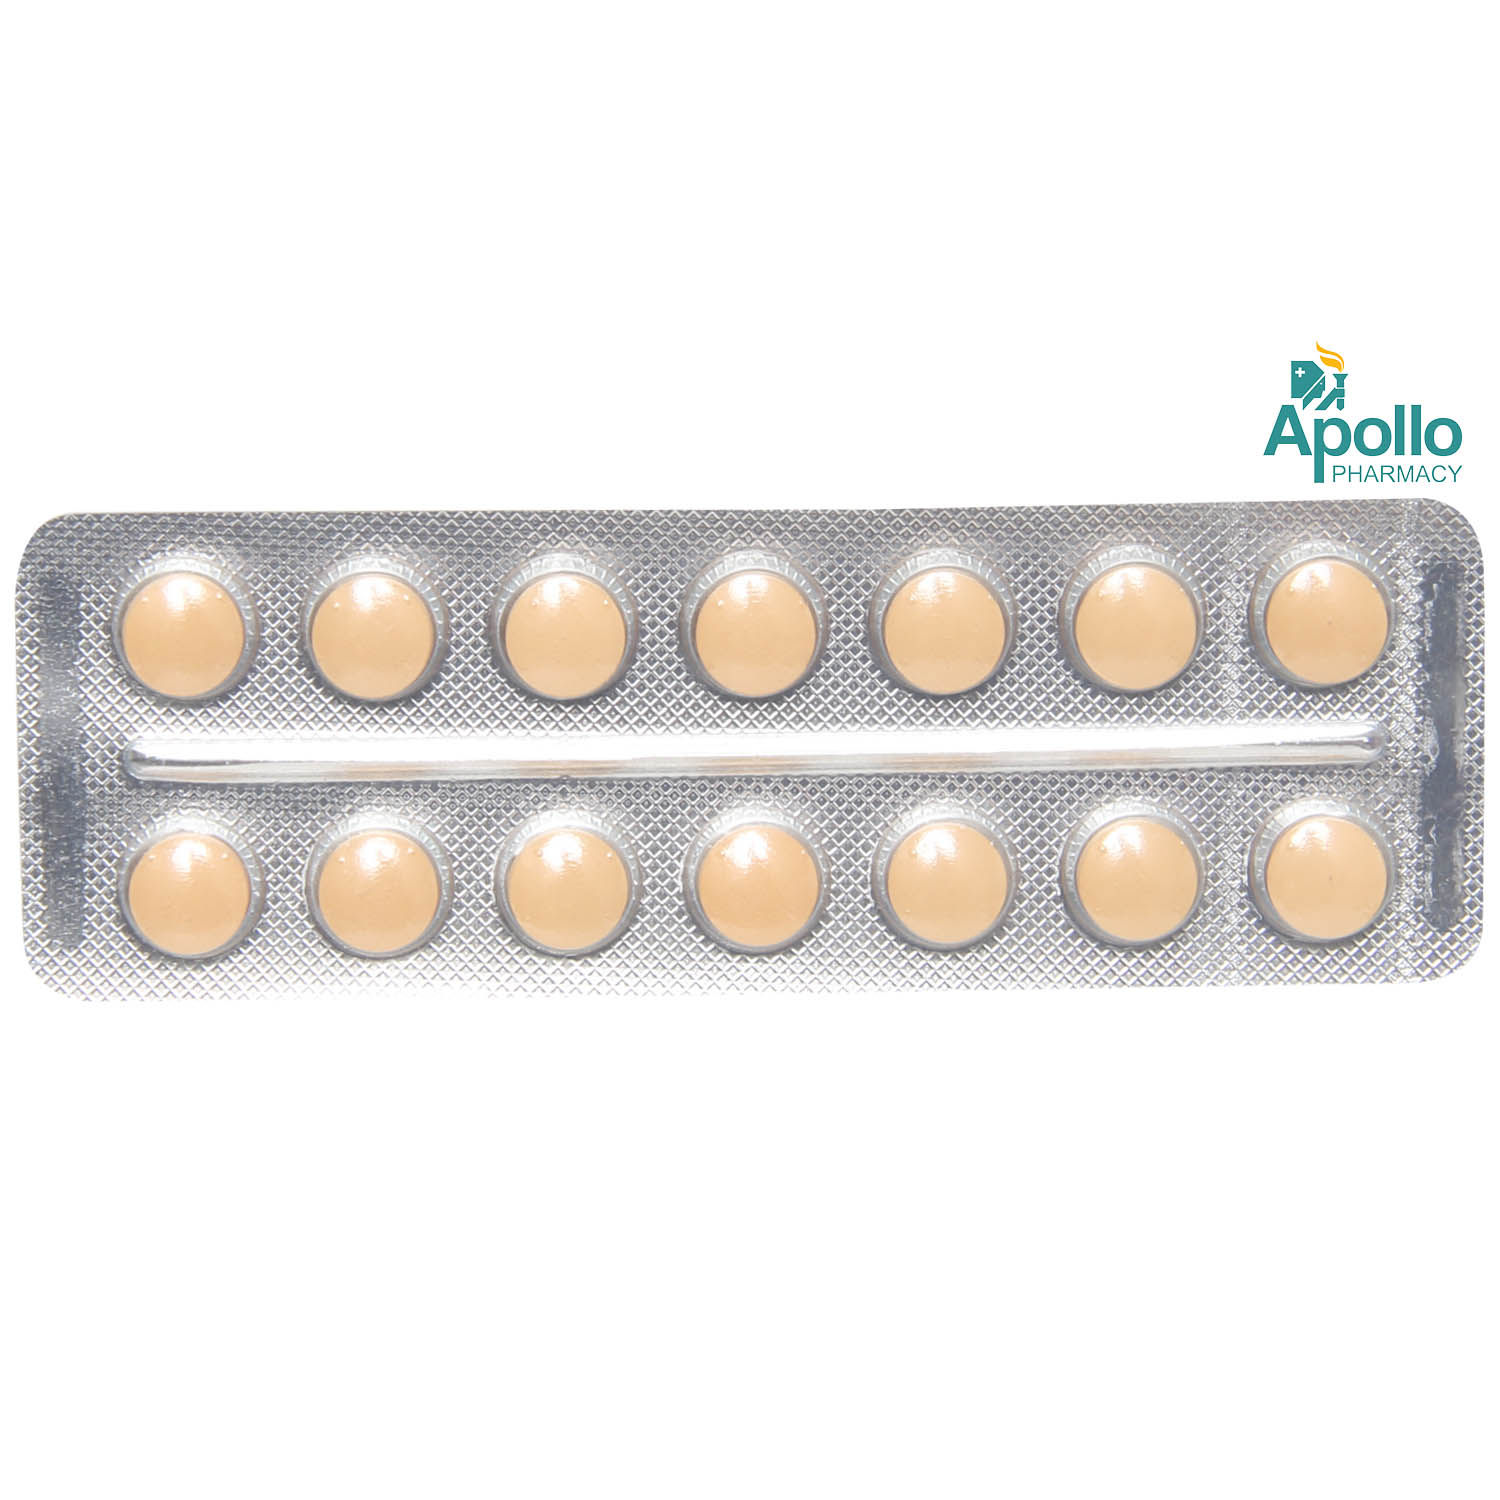 Ticacip 90 Tablet 14's, Pack of 14 TabletS